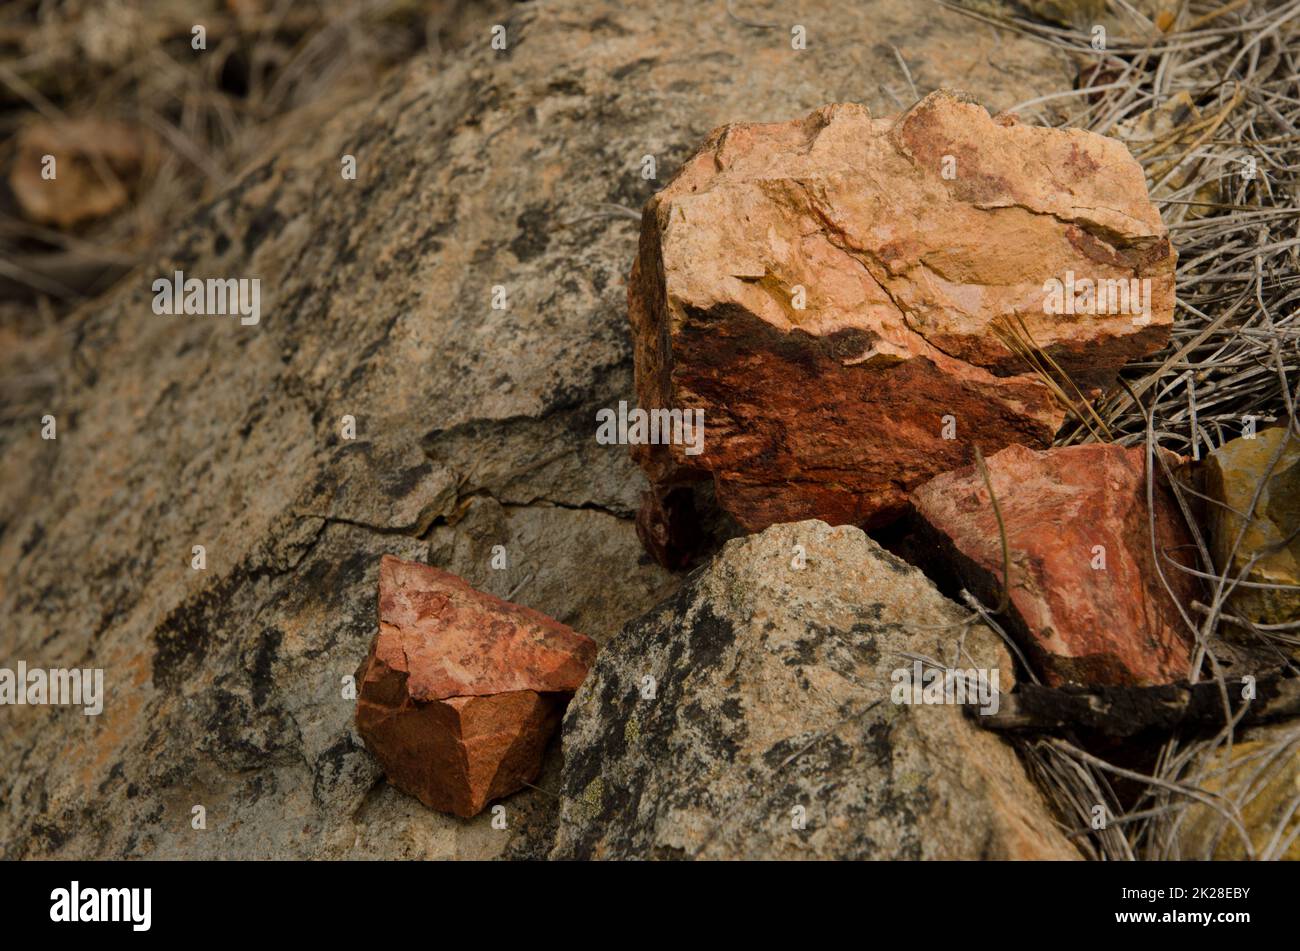 Stones of different colors in the Integral Natural Reserve of Inagua. Stock Photo